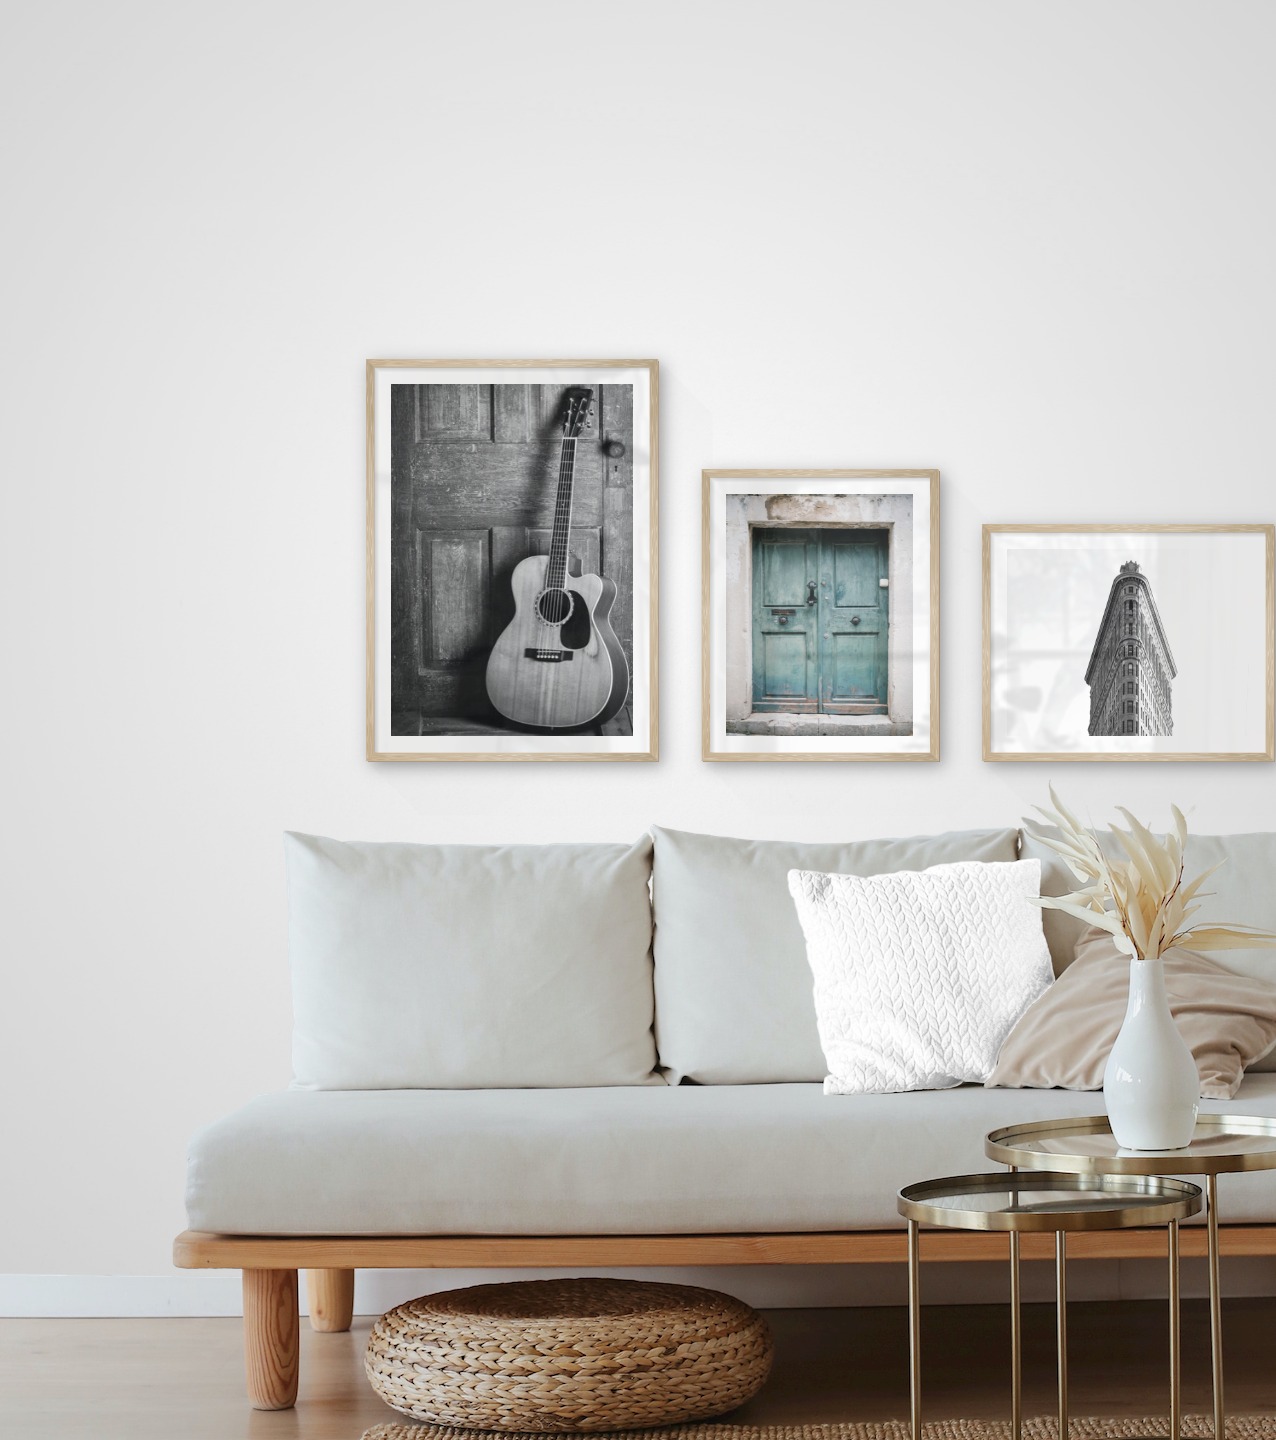 Gallery wall with picture frames in wood in sizes 50x70 and 40x50 with prints "Guitar", "Door" and "Triangular building"